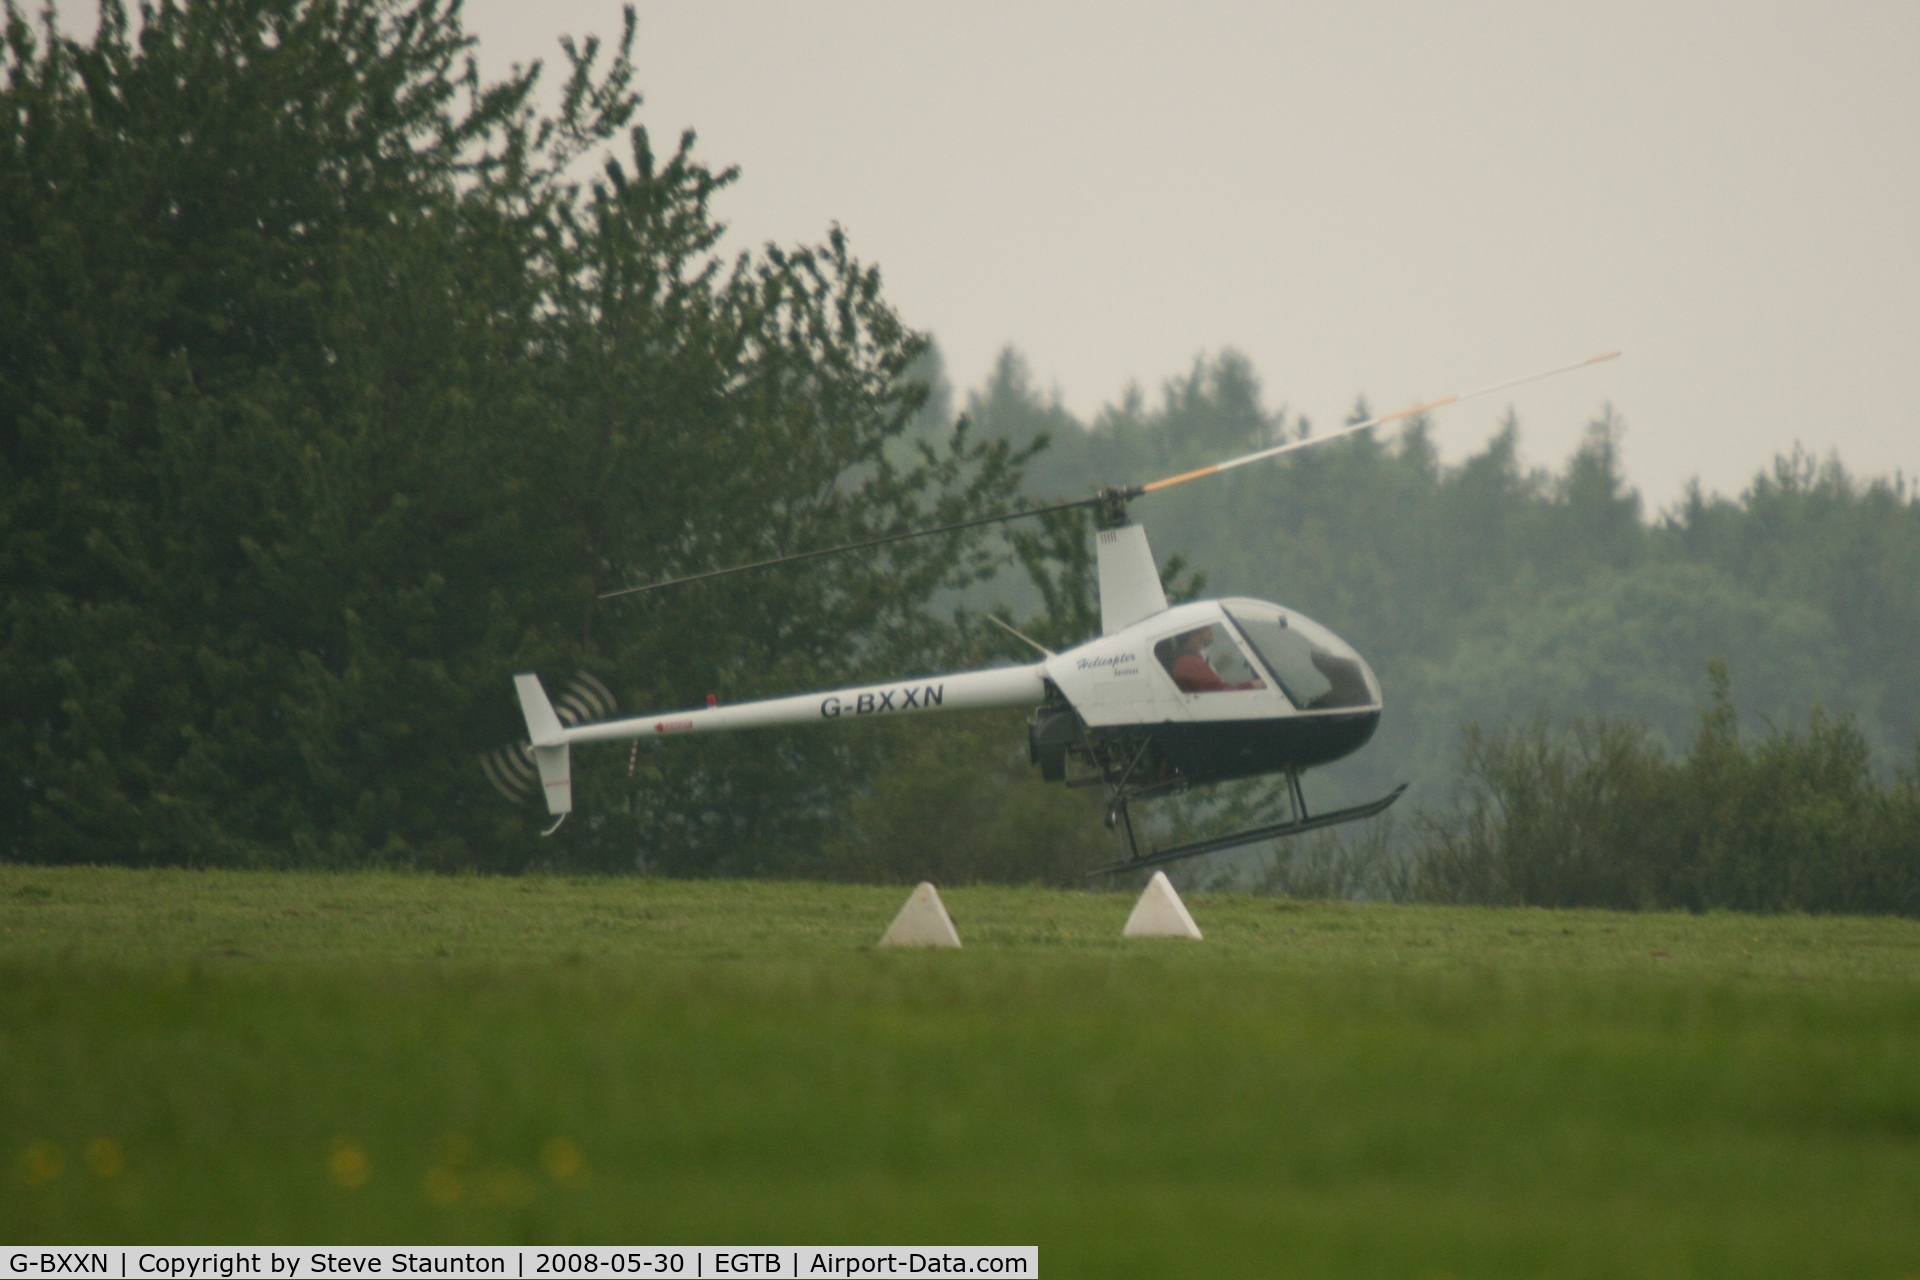 G-BXXN, 1987 Robinson R22 Beta II C/N 0720, Taken at Wycombe Air Park using my new Sigma 50 to 500 APO DG HSM lens (The Beast)